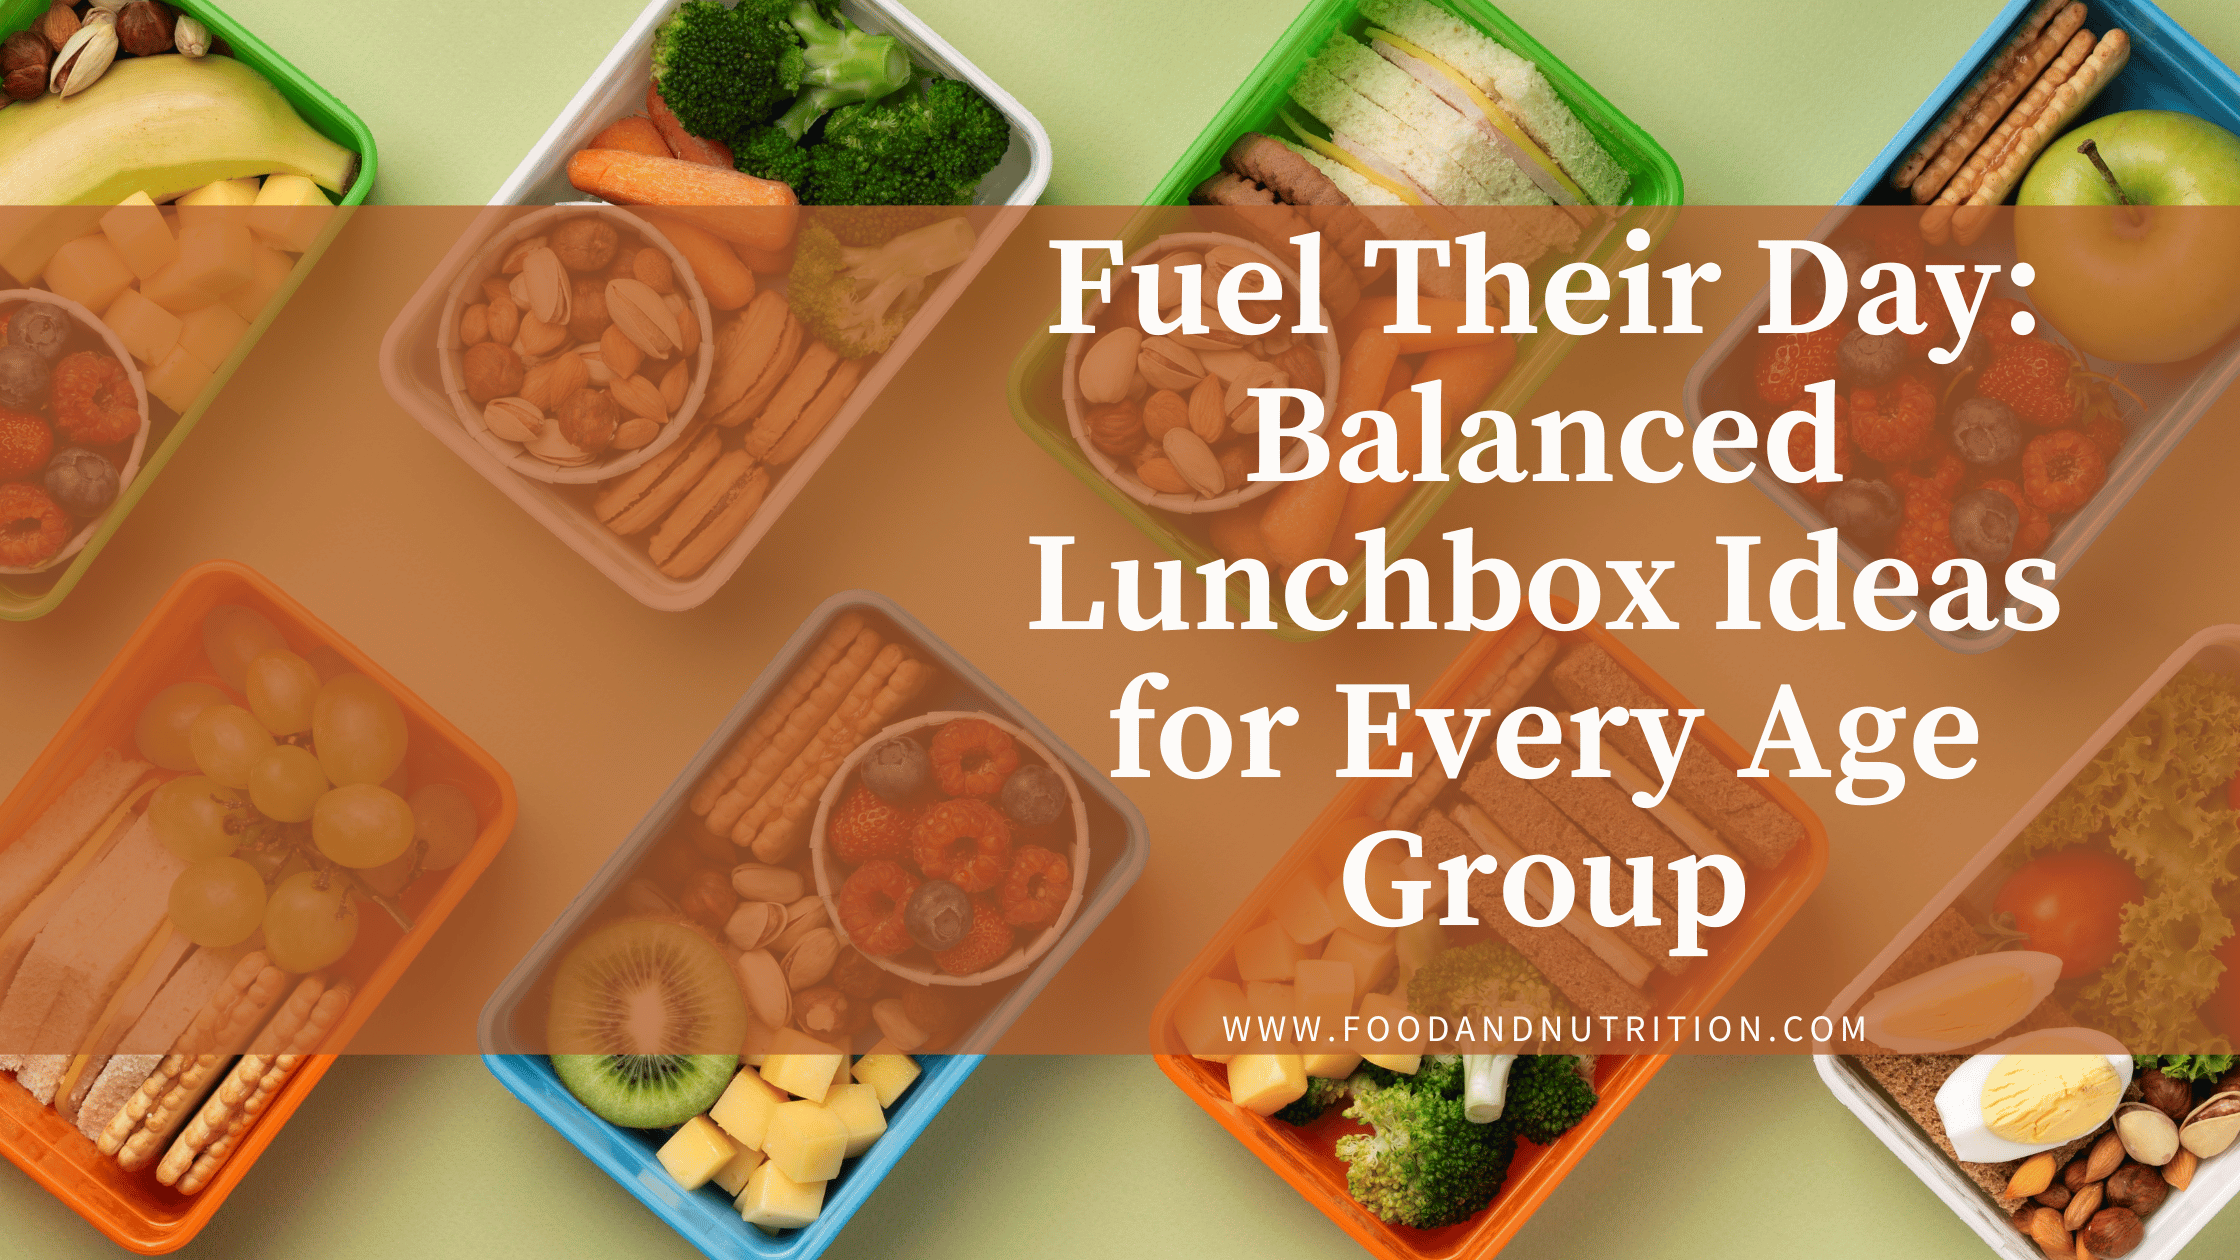 FUEL THEIR DAY: BALANCED LUNCHBOX IDEAS FOR EVERY AGE GROUP